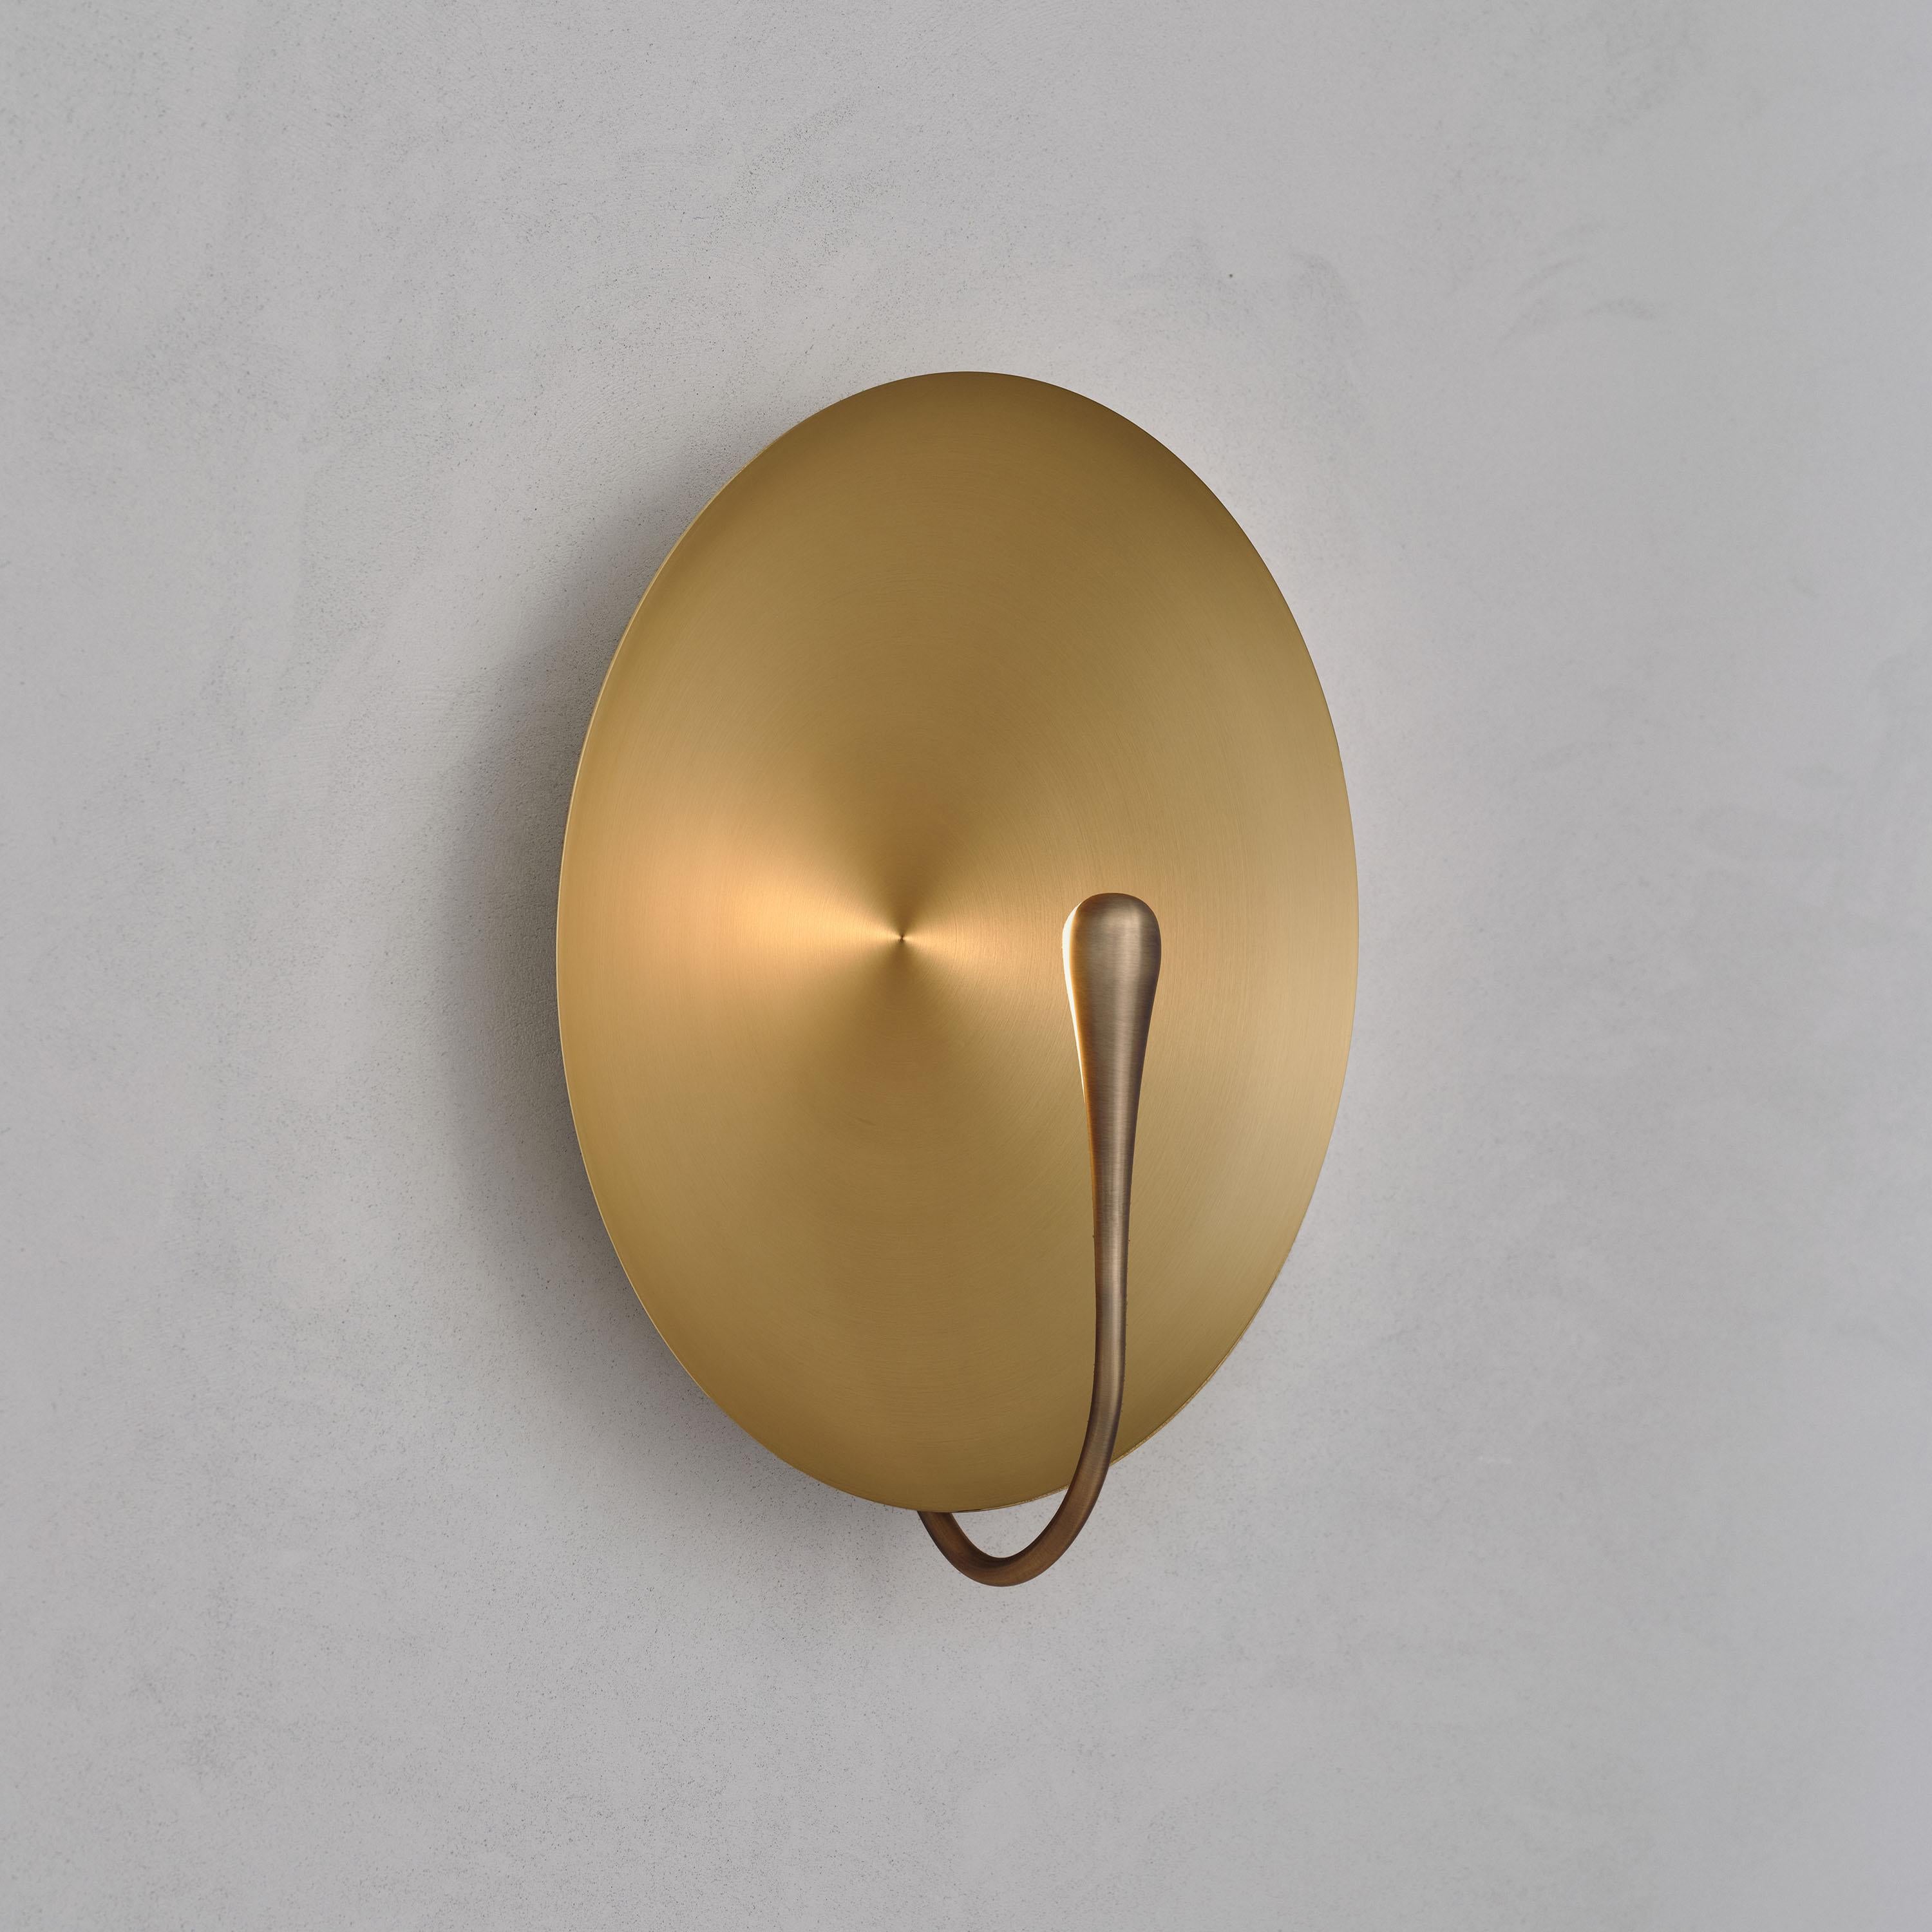 British 'Cosmic Sol' Handmade Brushed Brass Contemporary Wall Light, Sconce For Sale